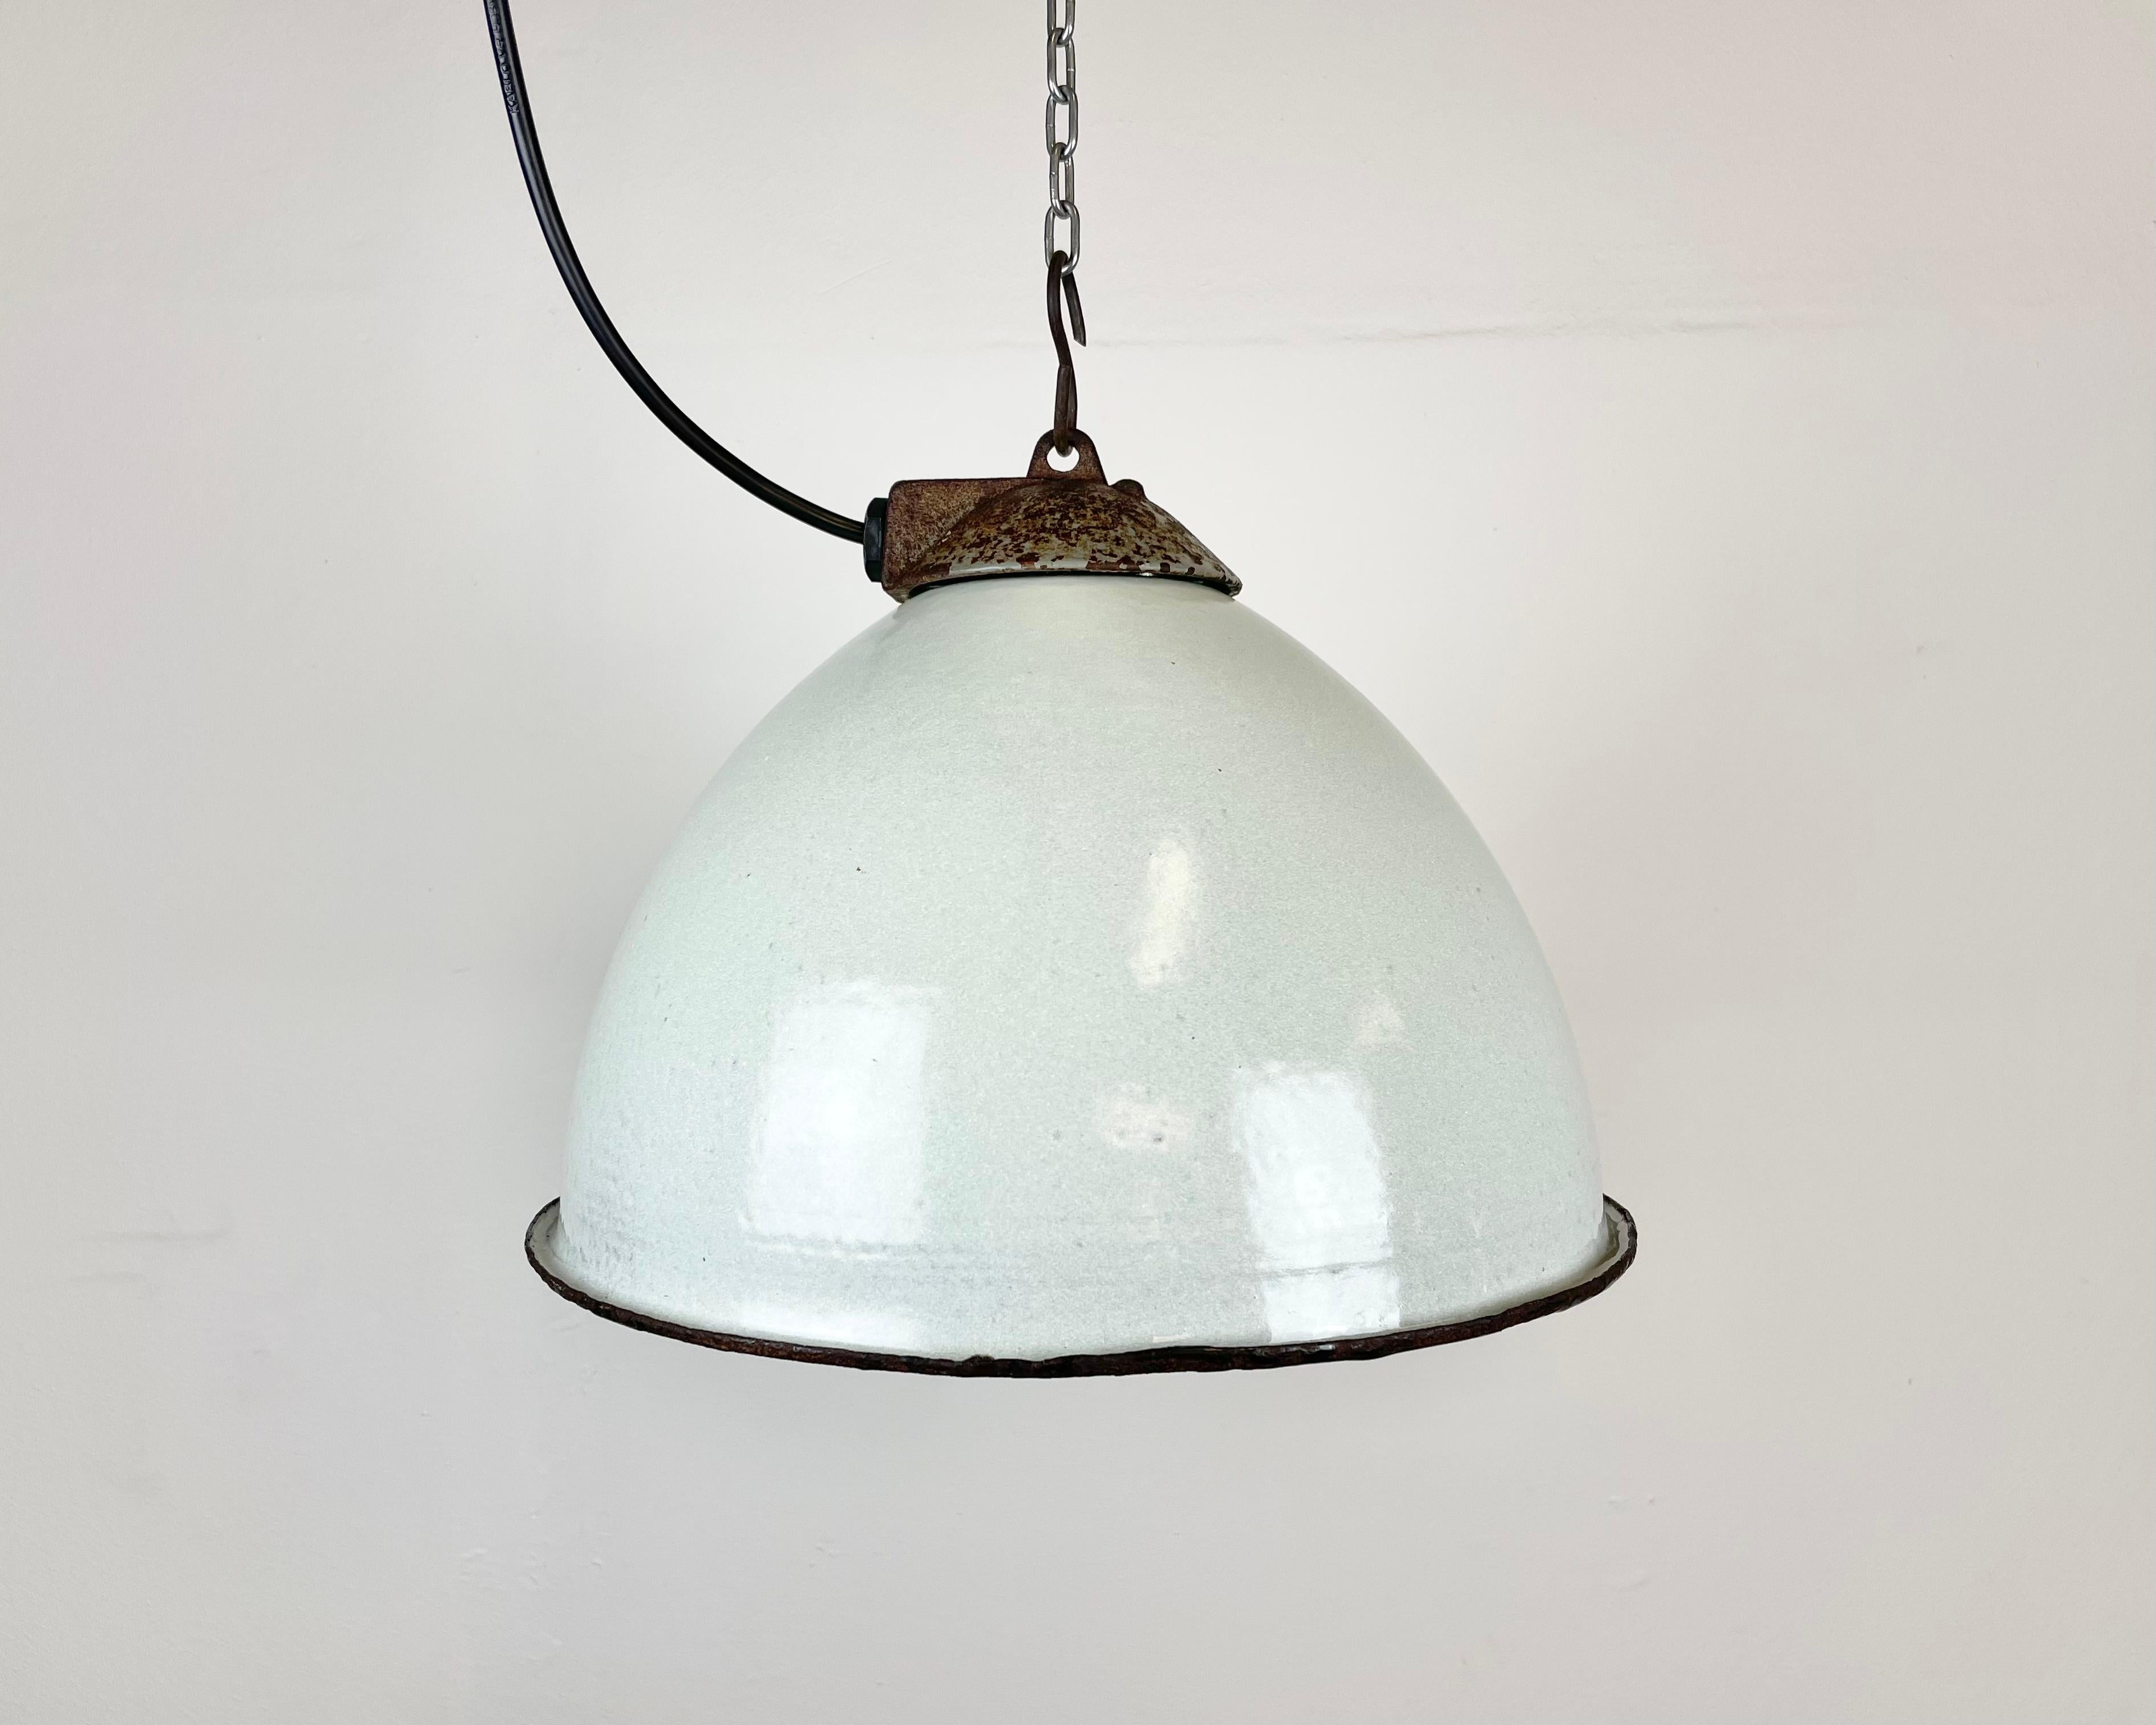 Industrial white grey enamel pendant light made by Zaos in Poland during the 1960s. White enamel inside the shade. Cast iron top. The porcelain socket requires E 27/ E26 light bulbs. New wire. Fully functional. The weight of the lamp is 1,8 kg.